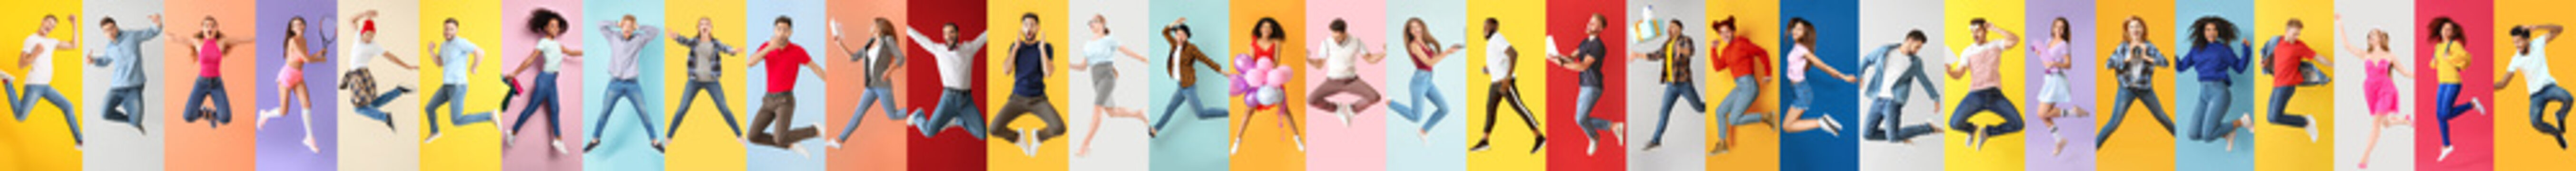 Collage of photos with different jumping people